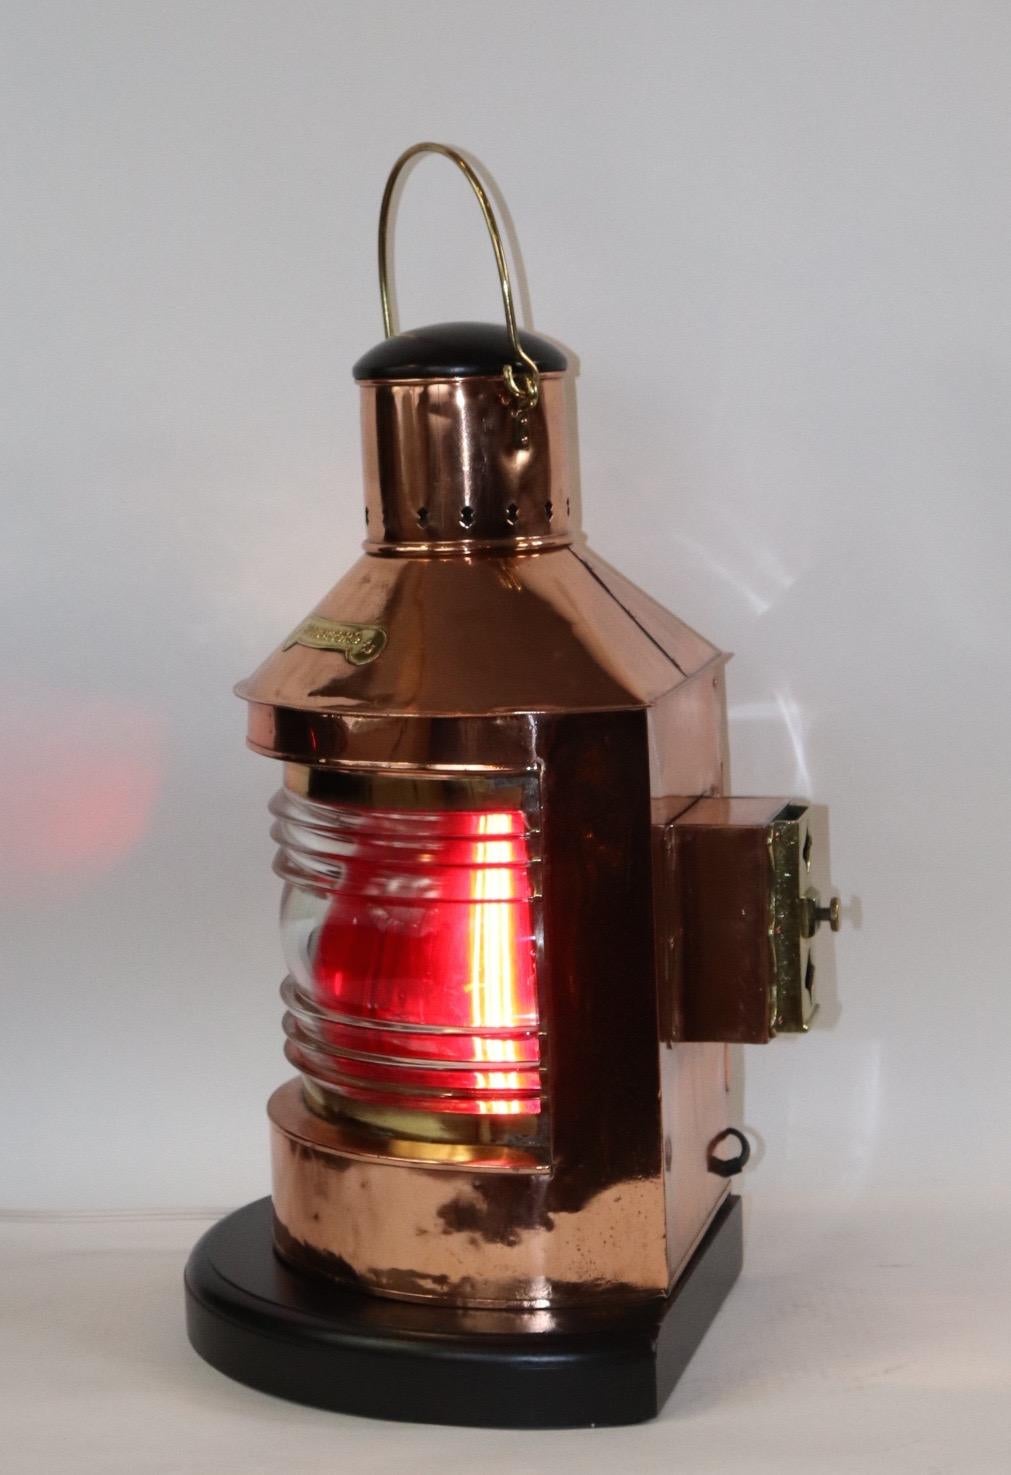 Copper ships lantern with highly polished and lacquered finish. With brass badge marked 